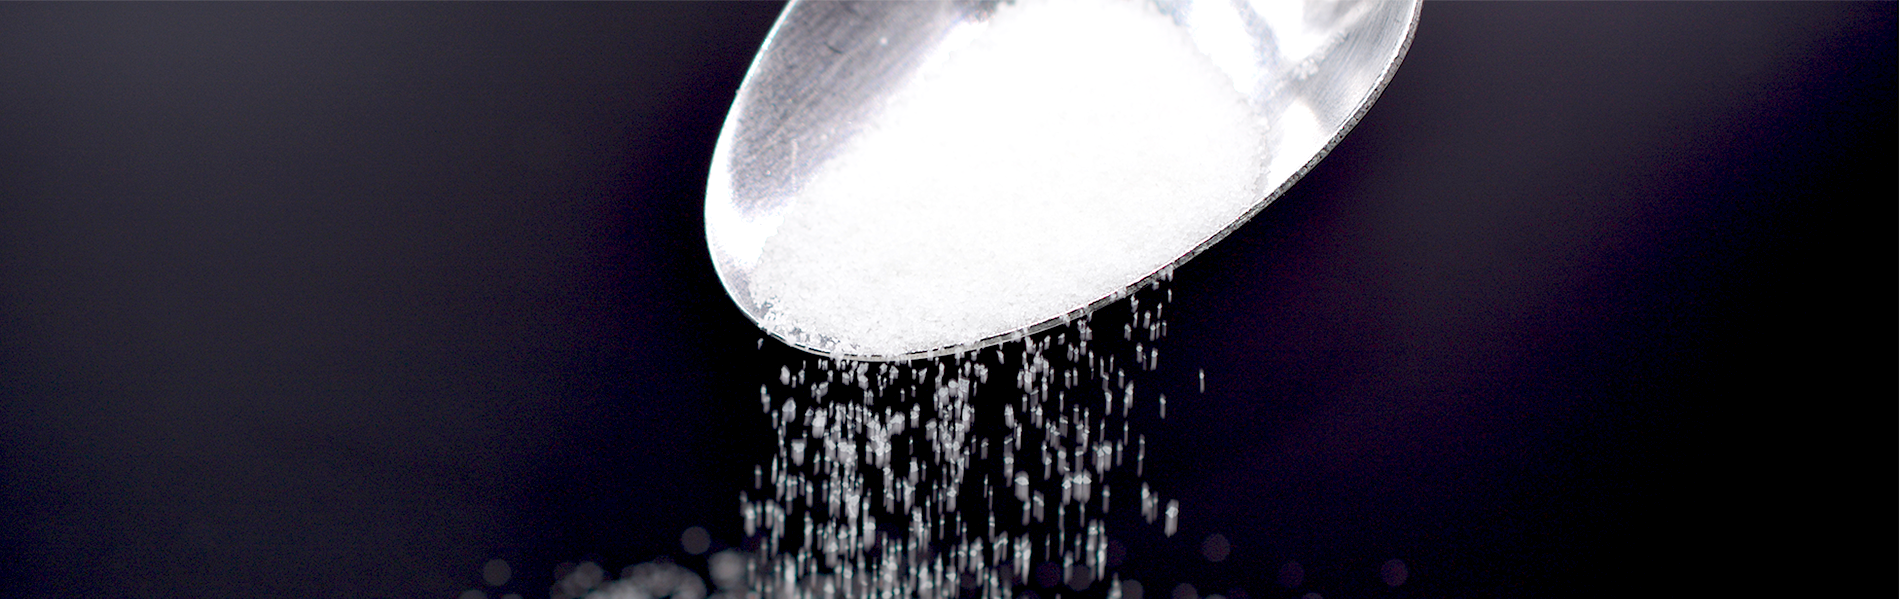 Superabsorbent polymer products being poured from a spoon